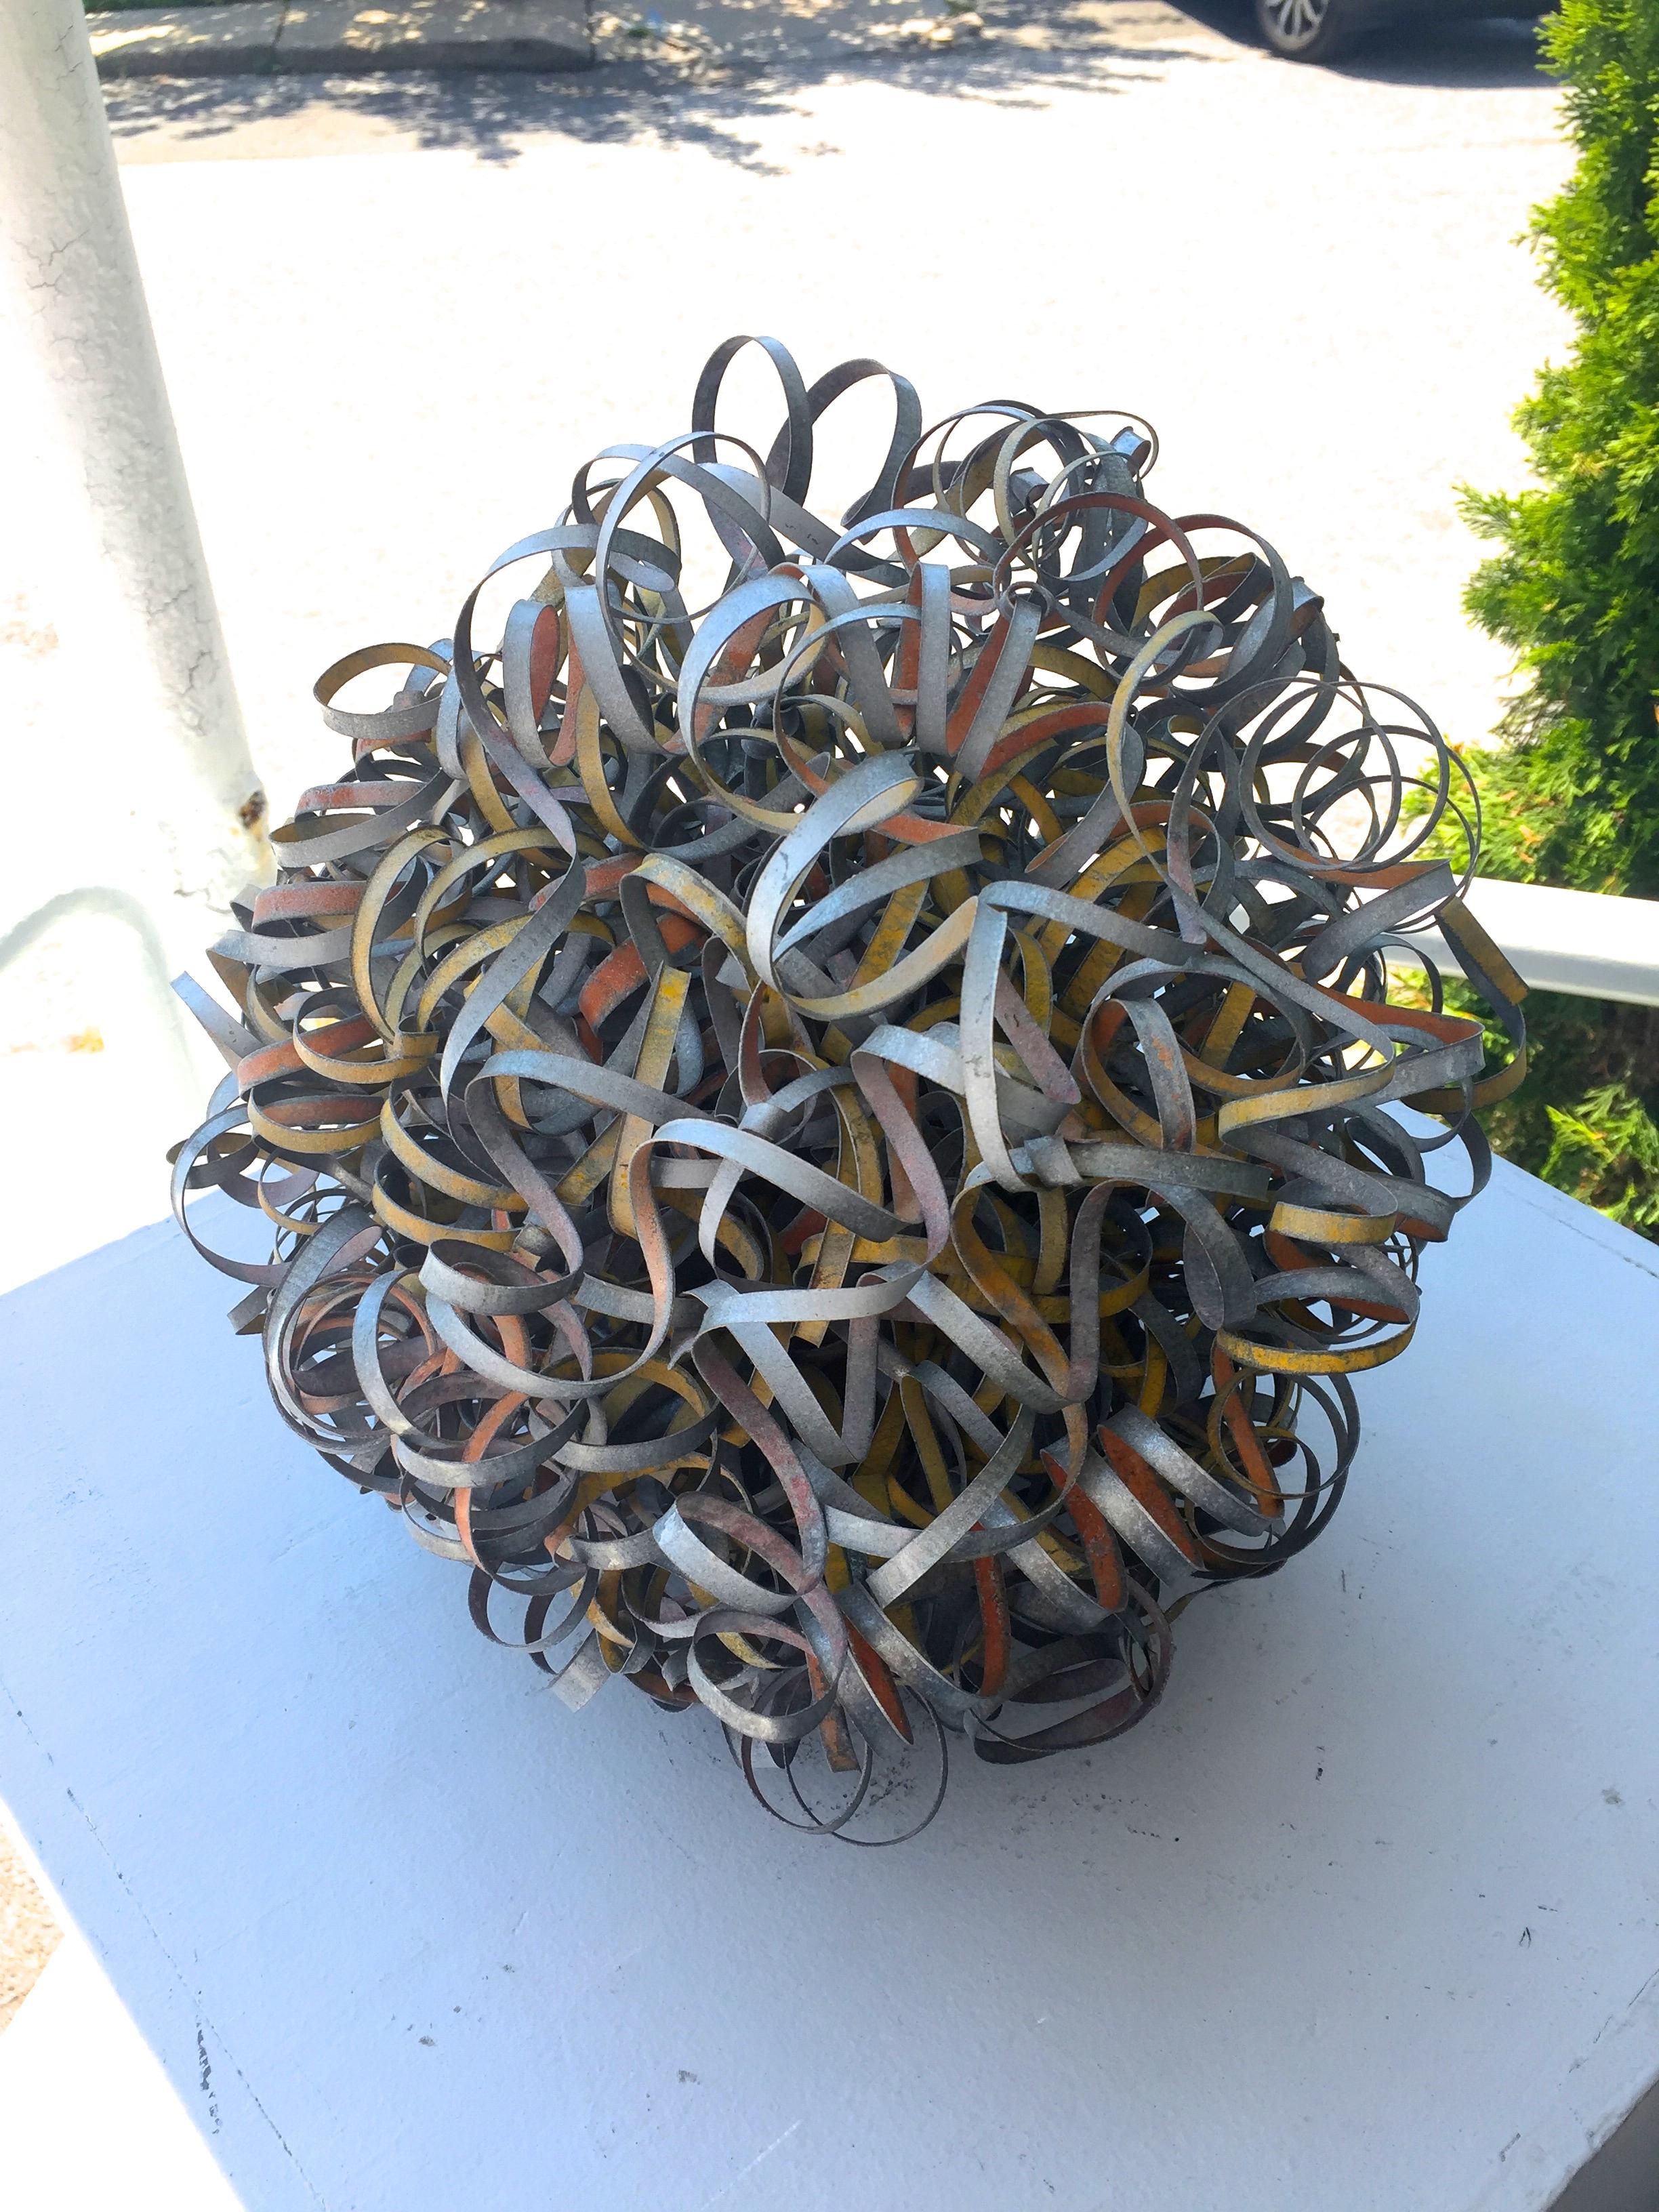 Copper Wire Spiral Ball Sculpture (Silver and Gold)
Sculpture with Industrial Urbanized Metal Materials
16